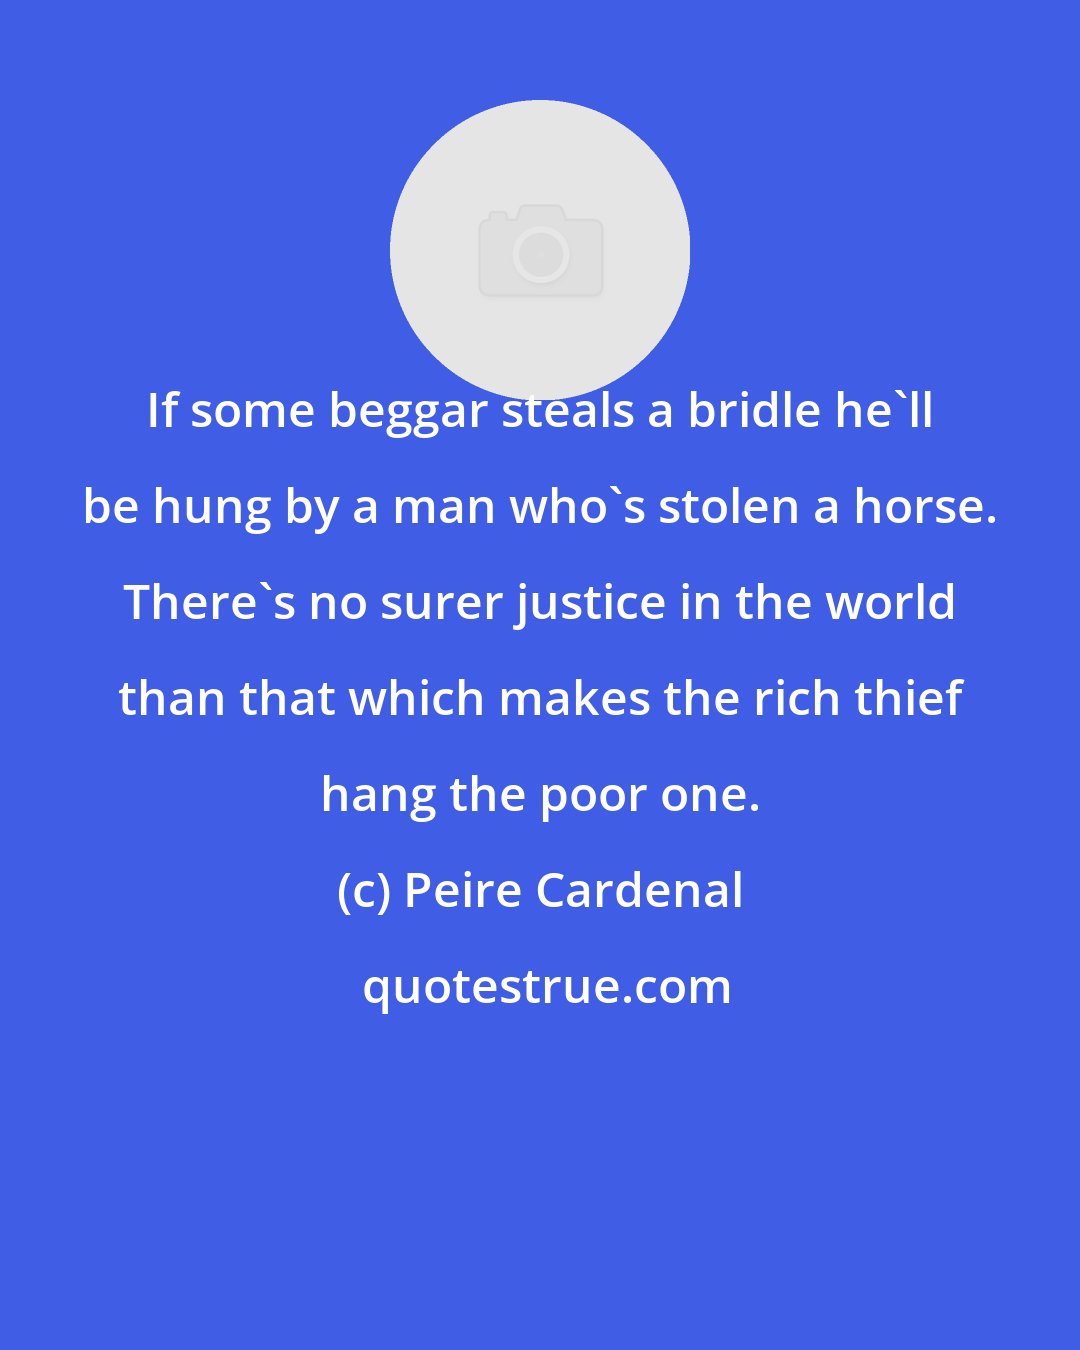 Peire Cardenal: If some beggar steals a bridle he'll be hung by a man who's stolen a horse. There's no surer justice in the world than that which makes the rich thief hang the poor one.